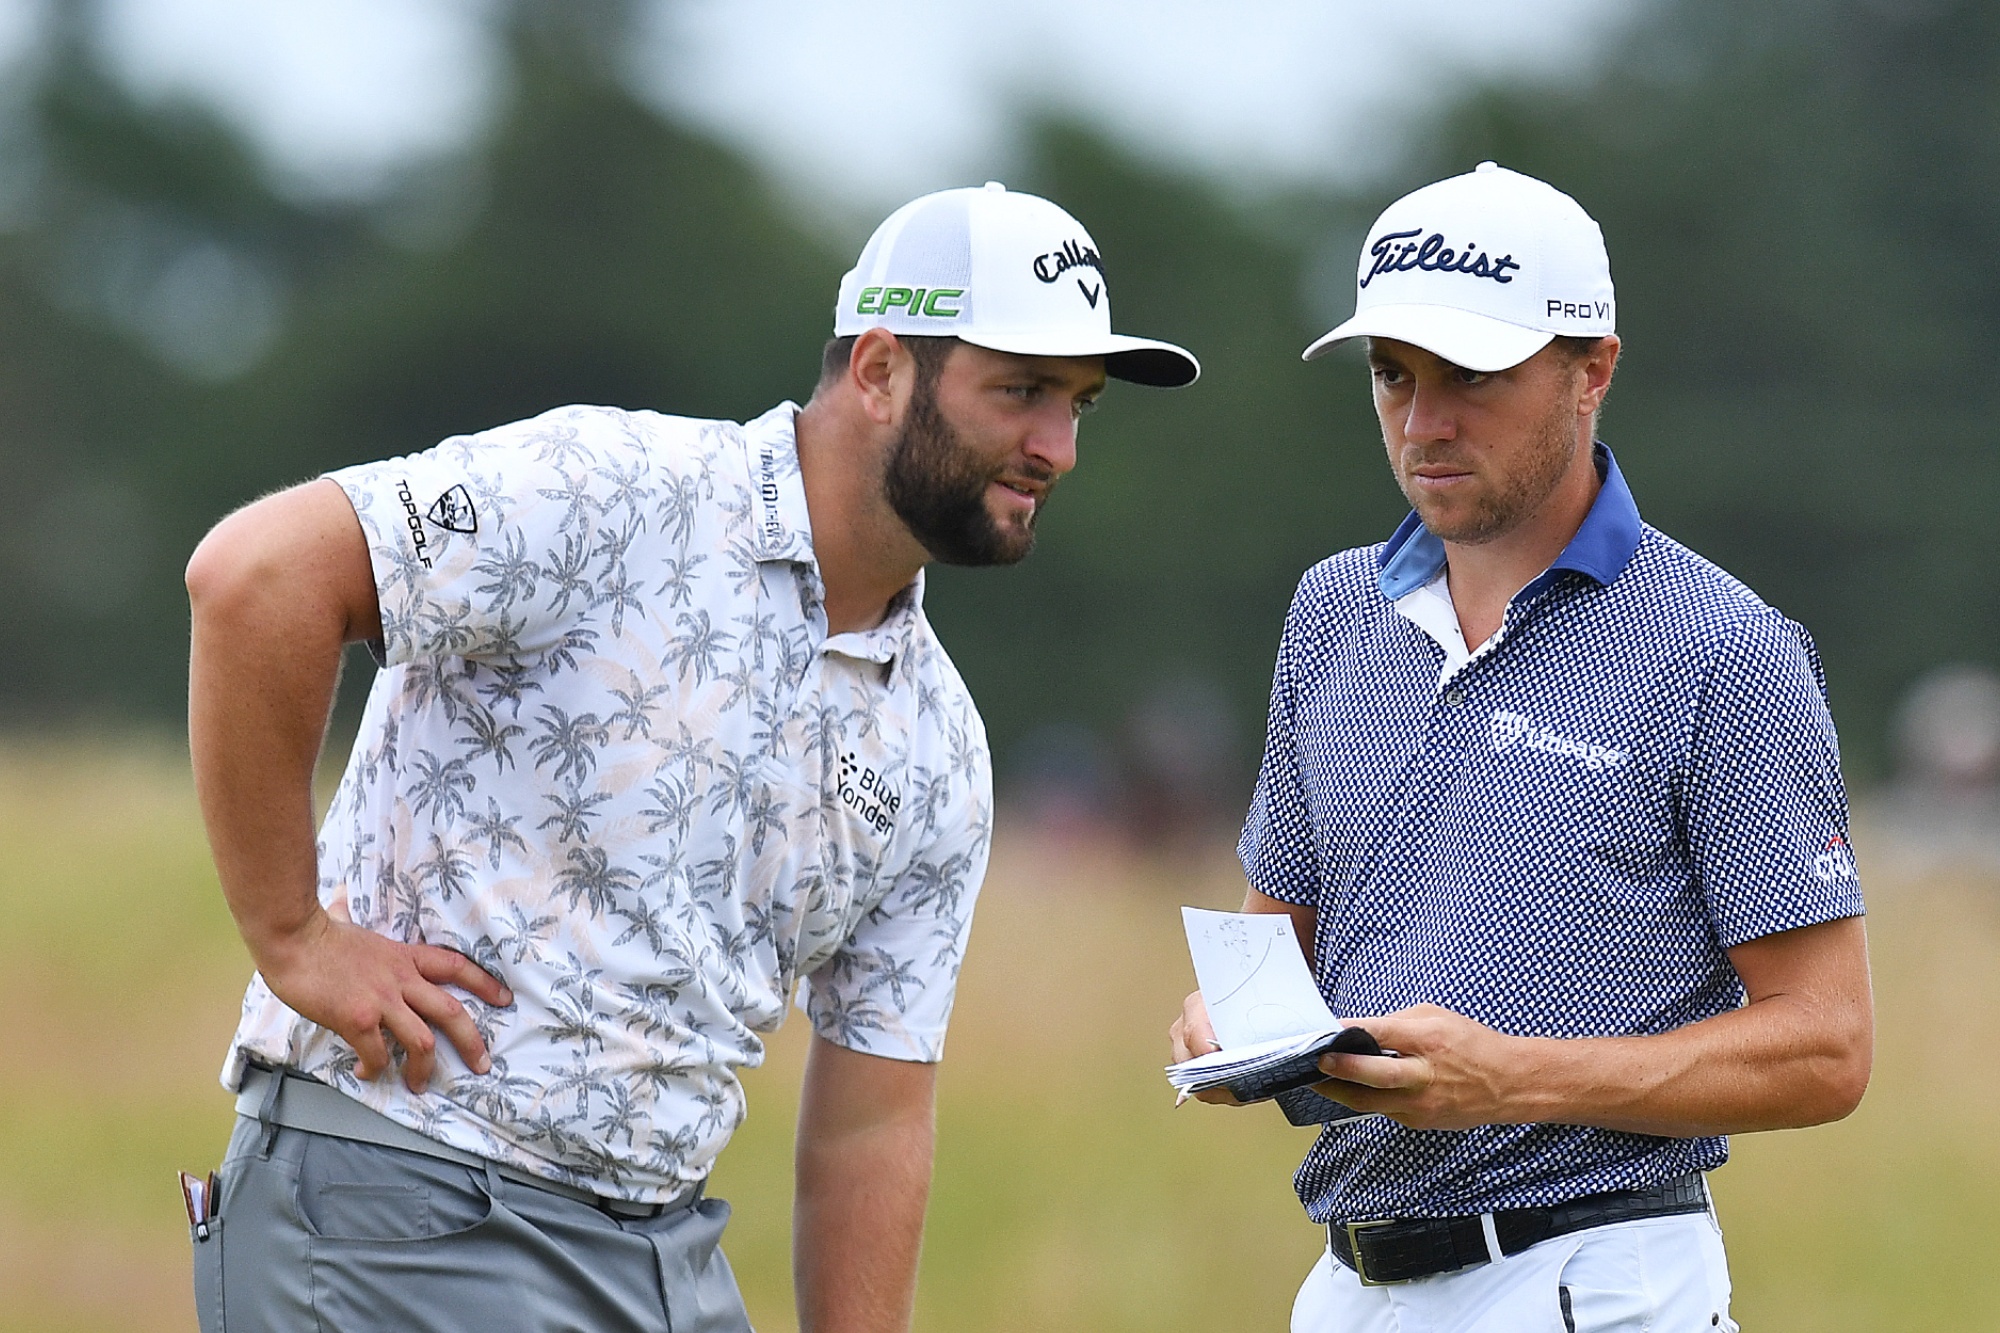 Mocked LIV player reveals texts of support from JT and Rahm